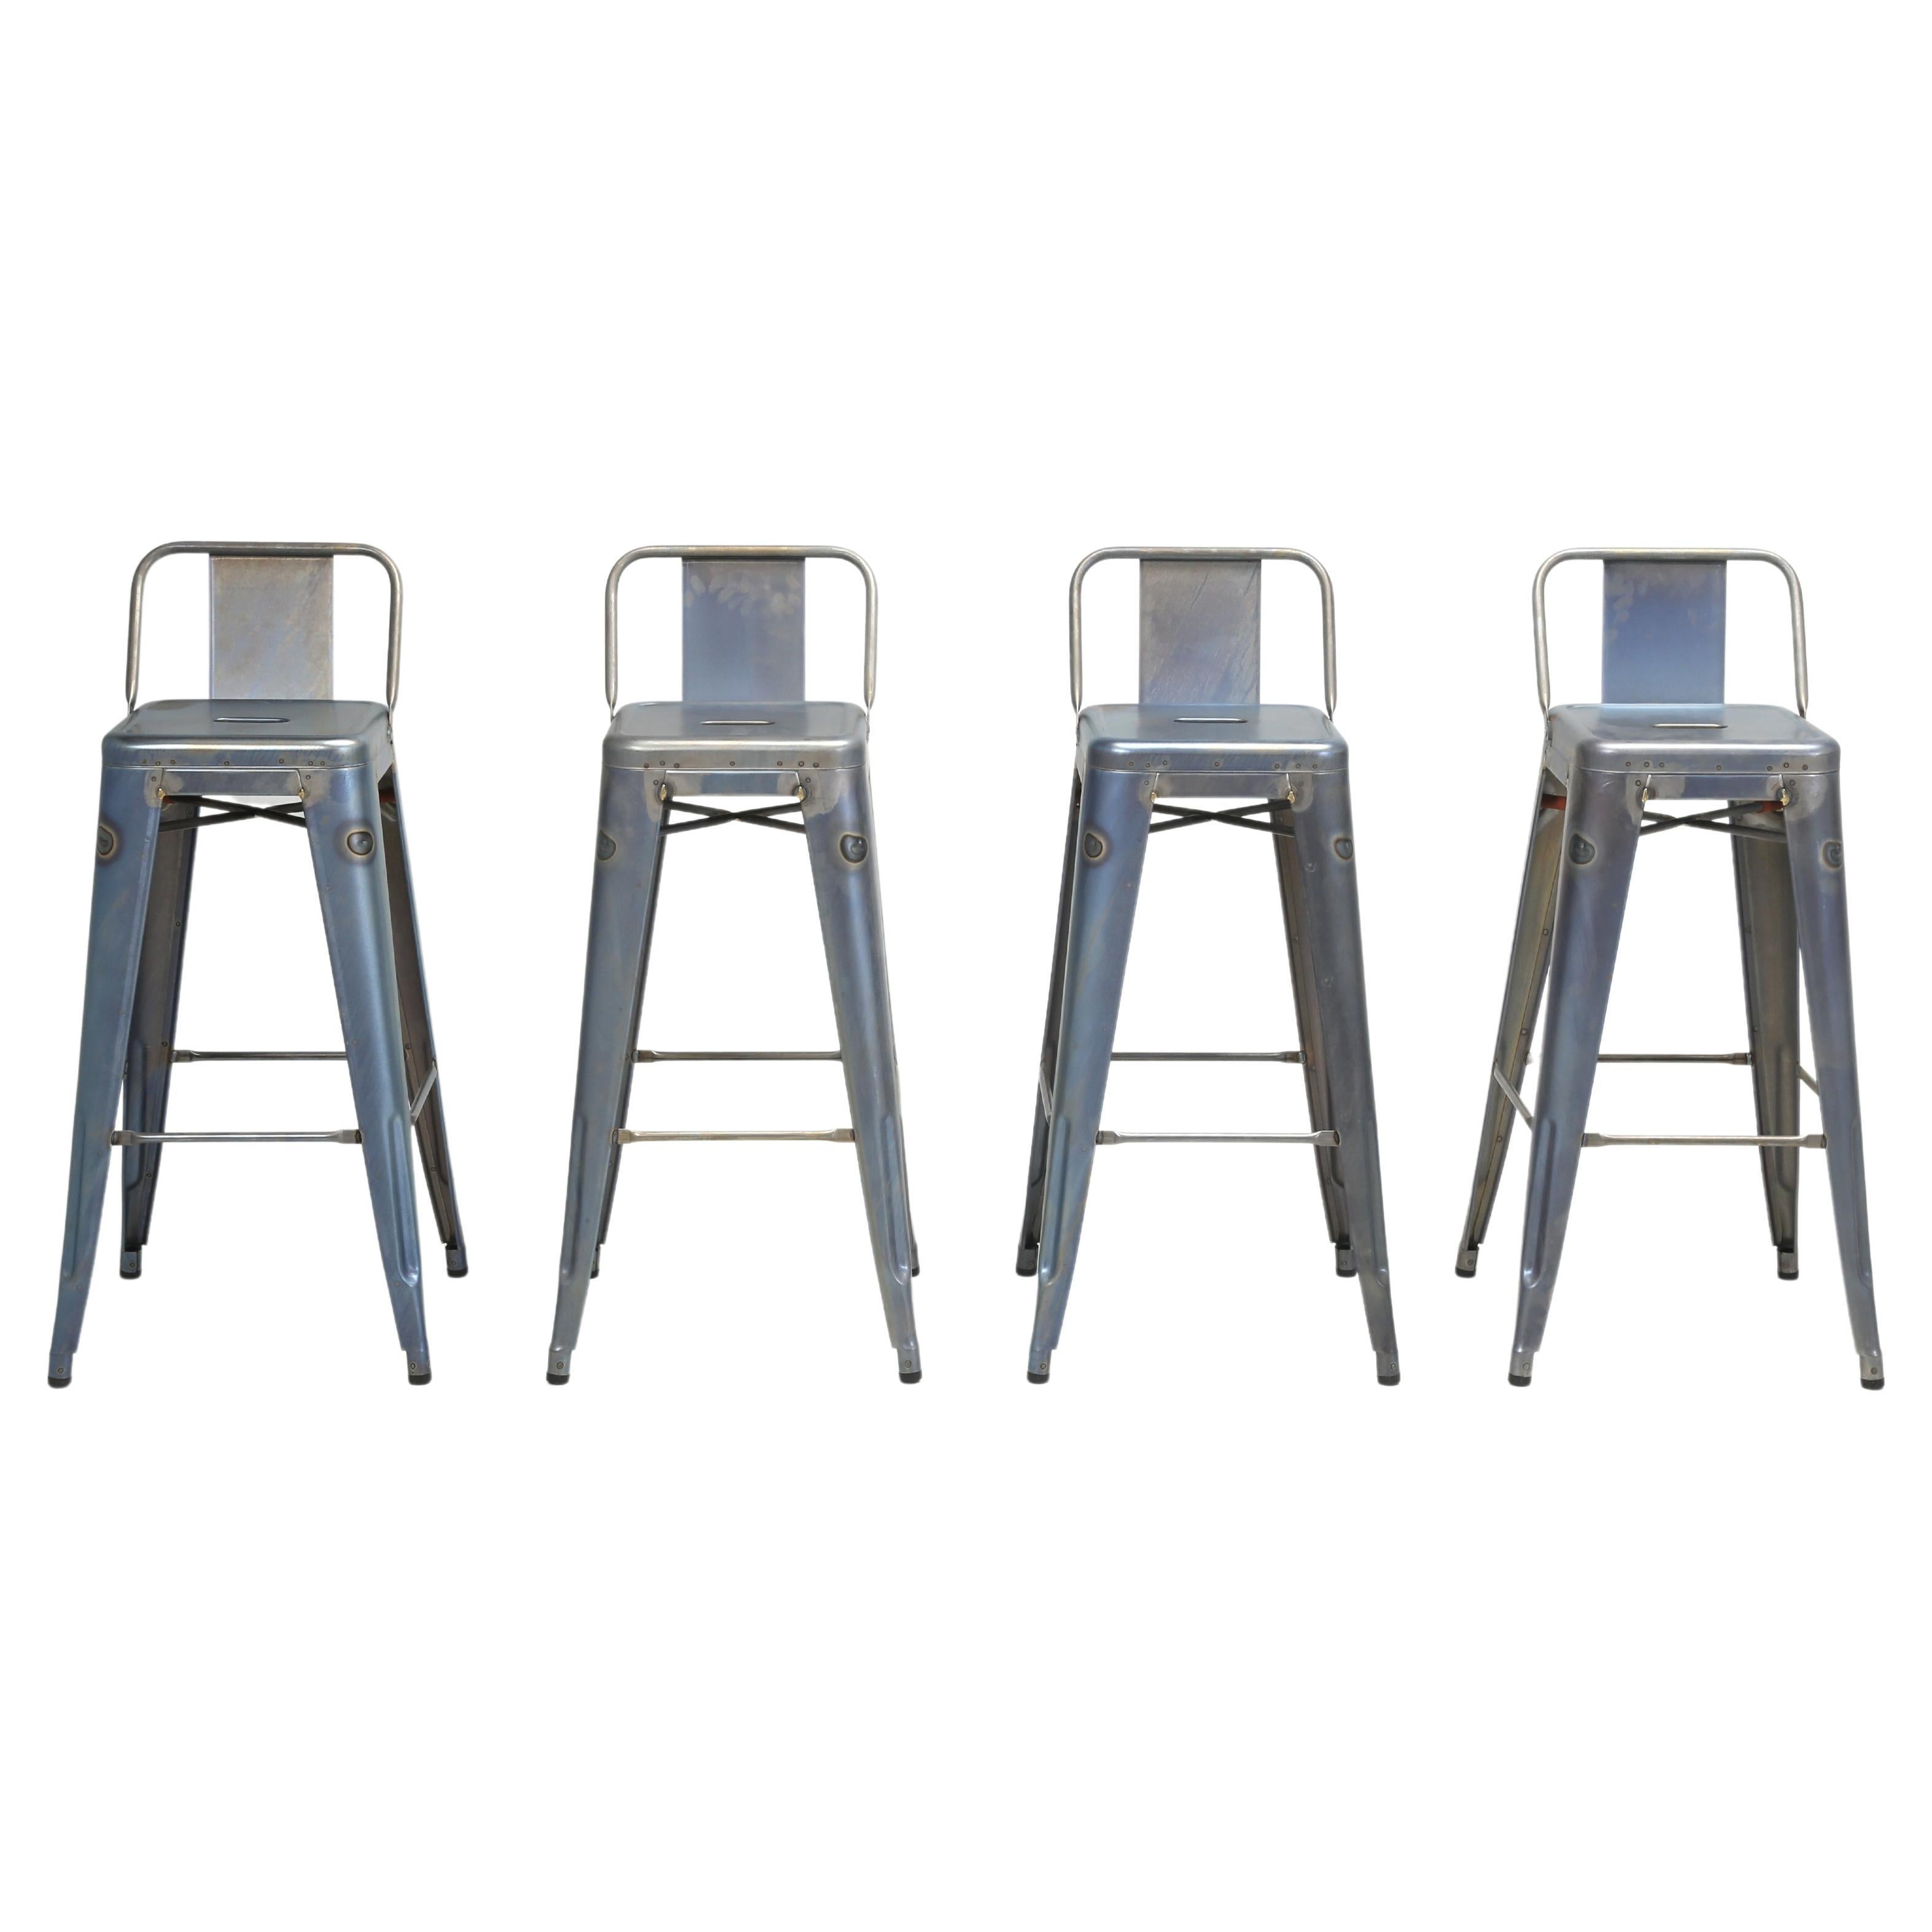 Genuine Tolix Steel Bar Height Stools in a Blue Wash (46) Currently Available